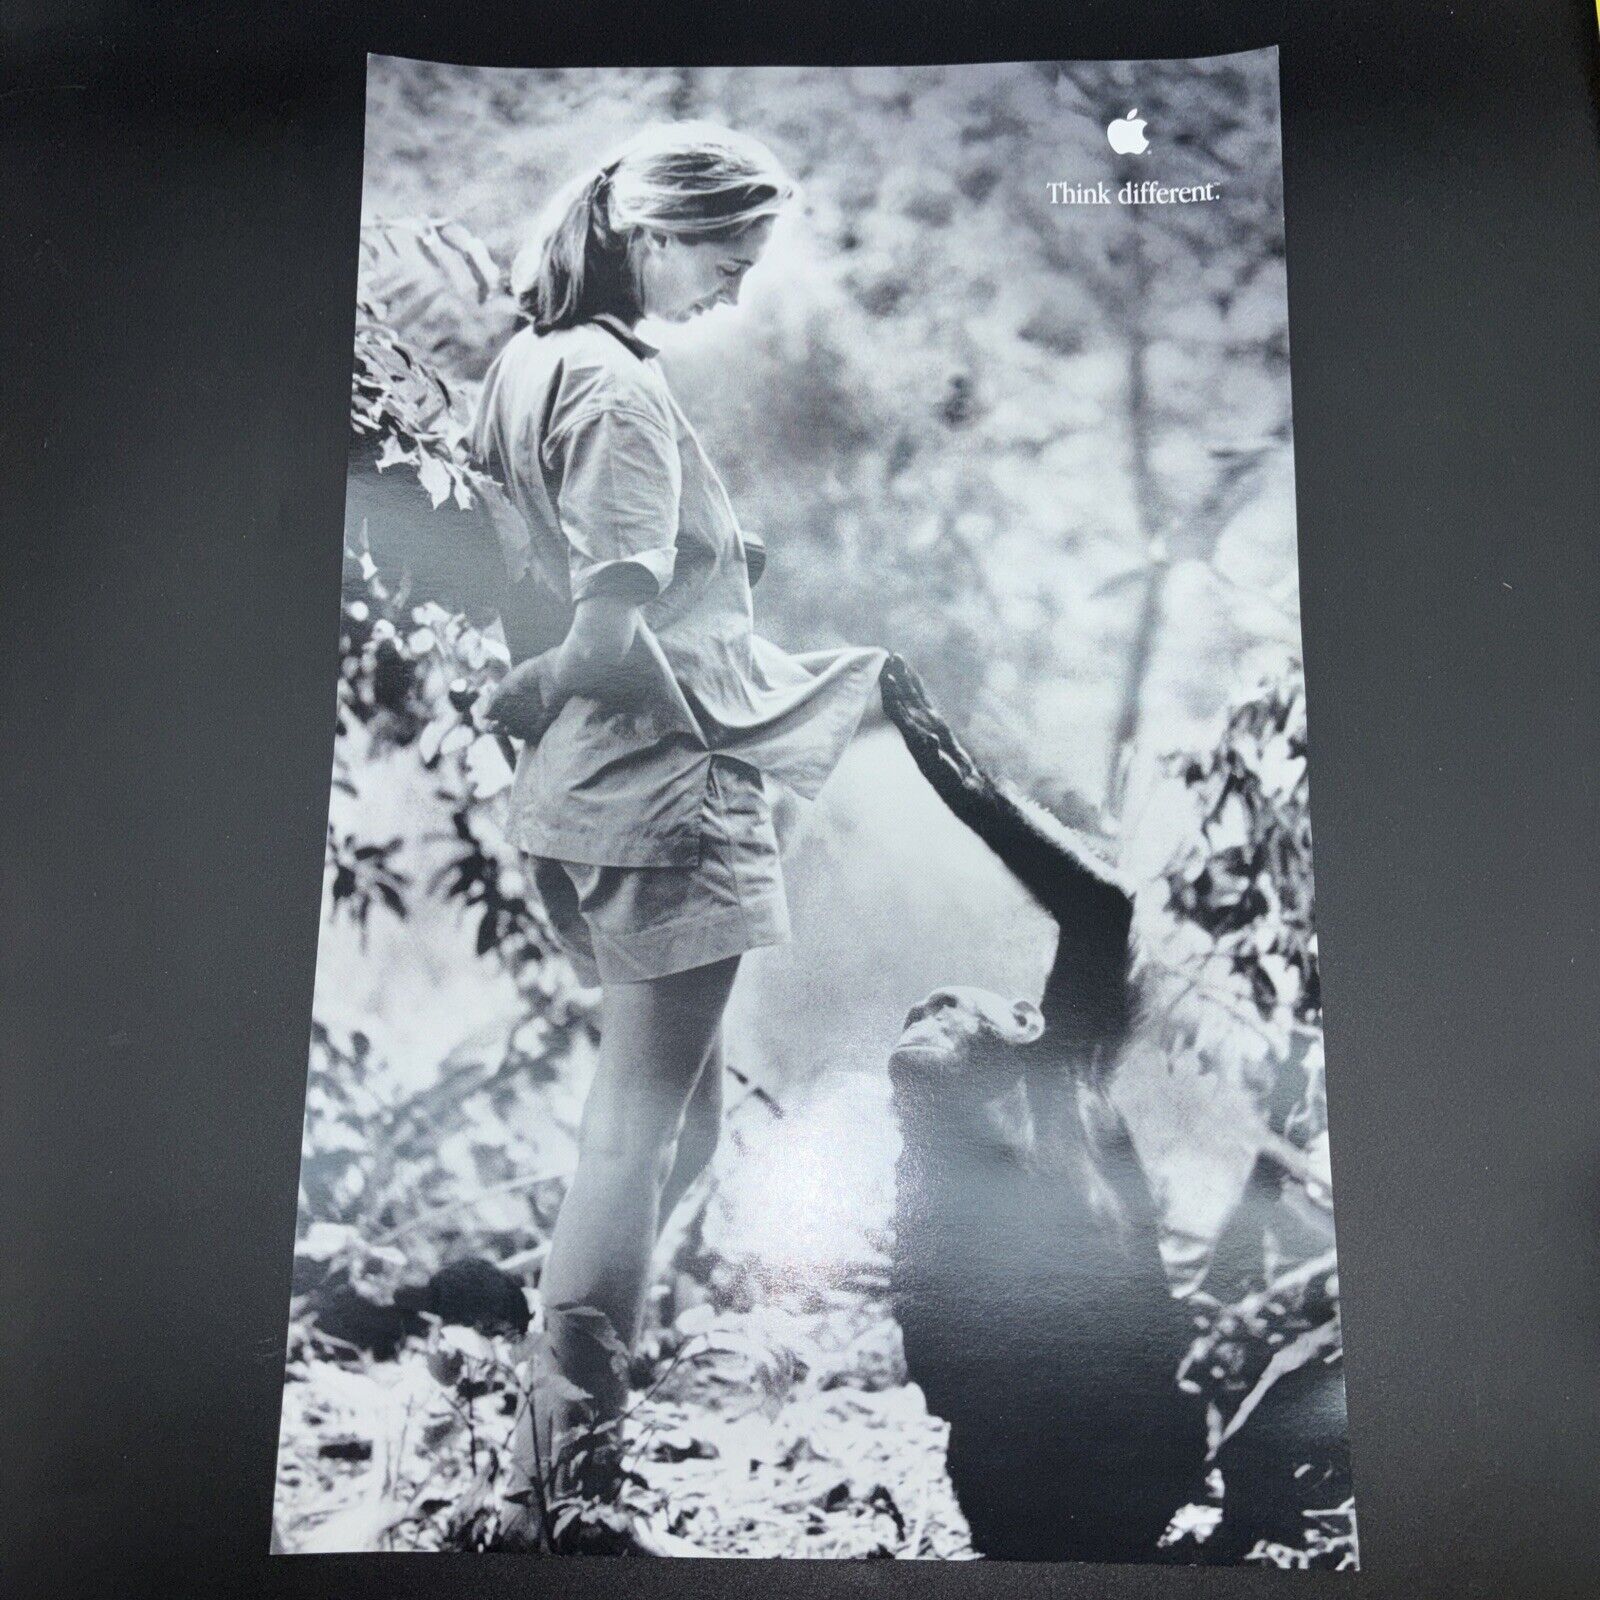 Apple Think Different Jane Goodall Poster 11”x17” Chimpanzee, ￼ Great Condition